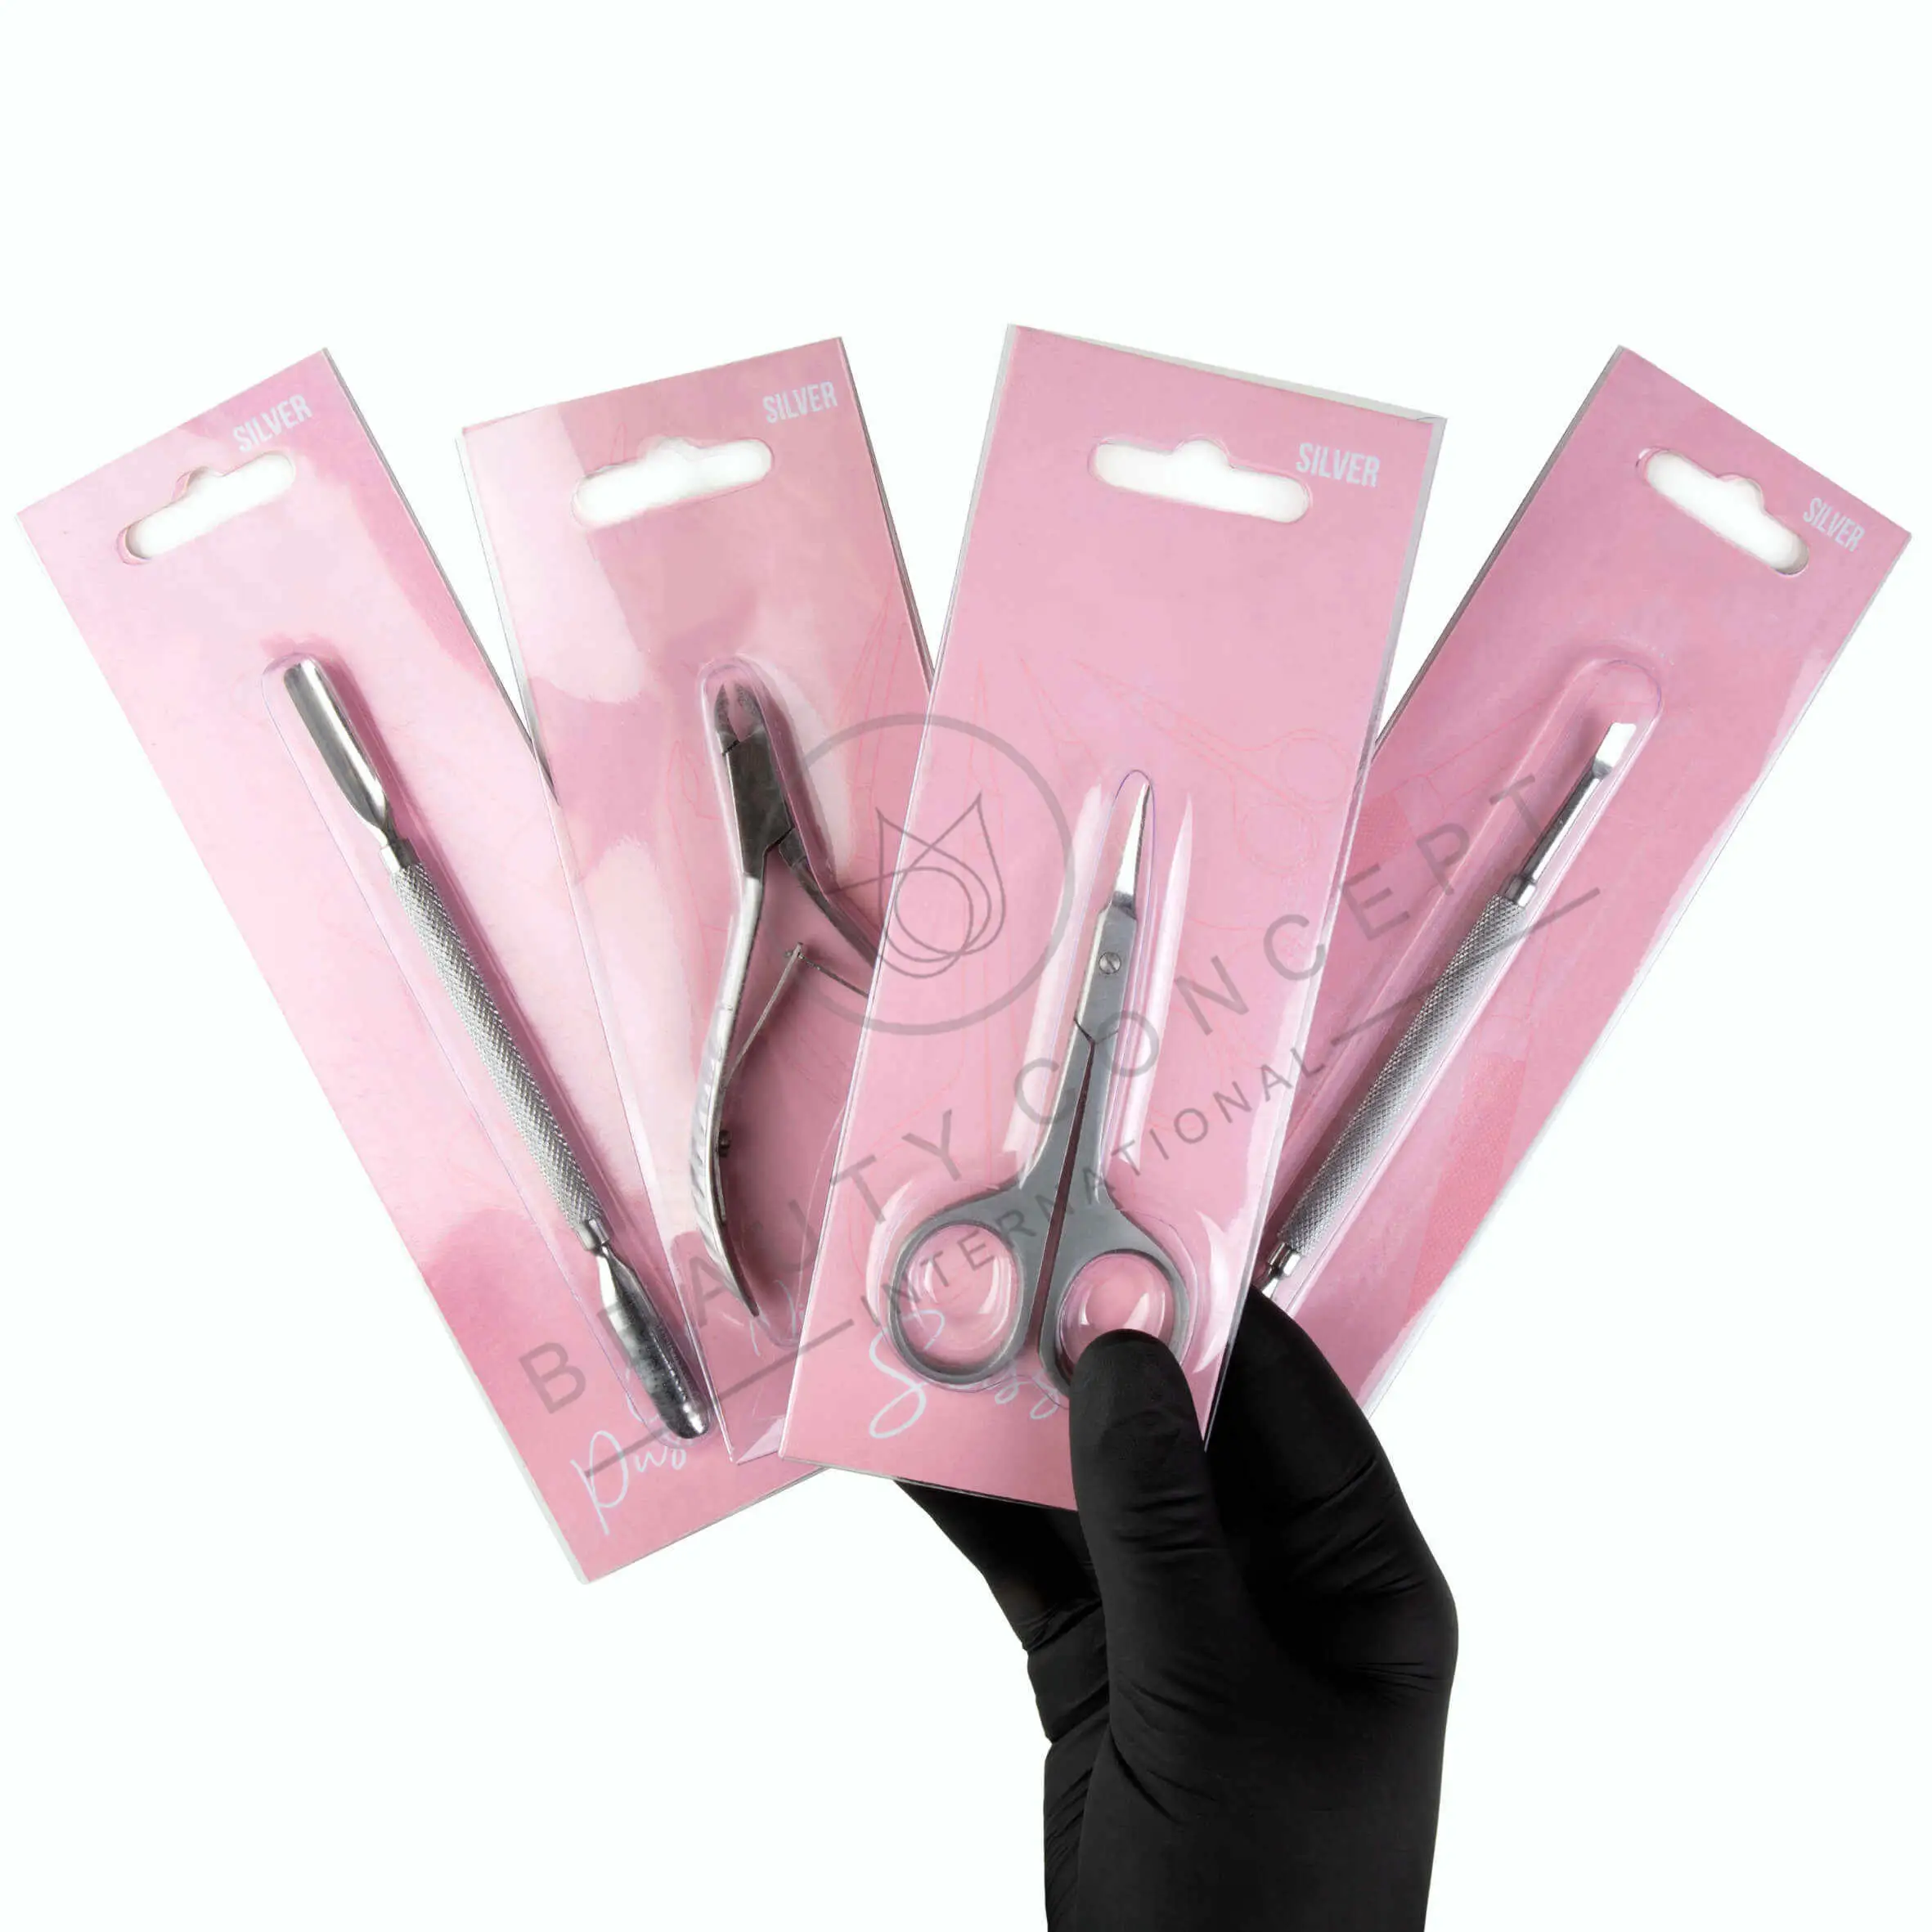 Beautifully Blister Packed Manicure Tools - Cuticle Scissors Nail Art Tools - Stainless Steel Cuticle Nippers Cuticle Pushers